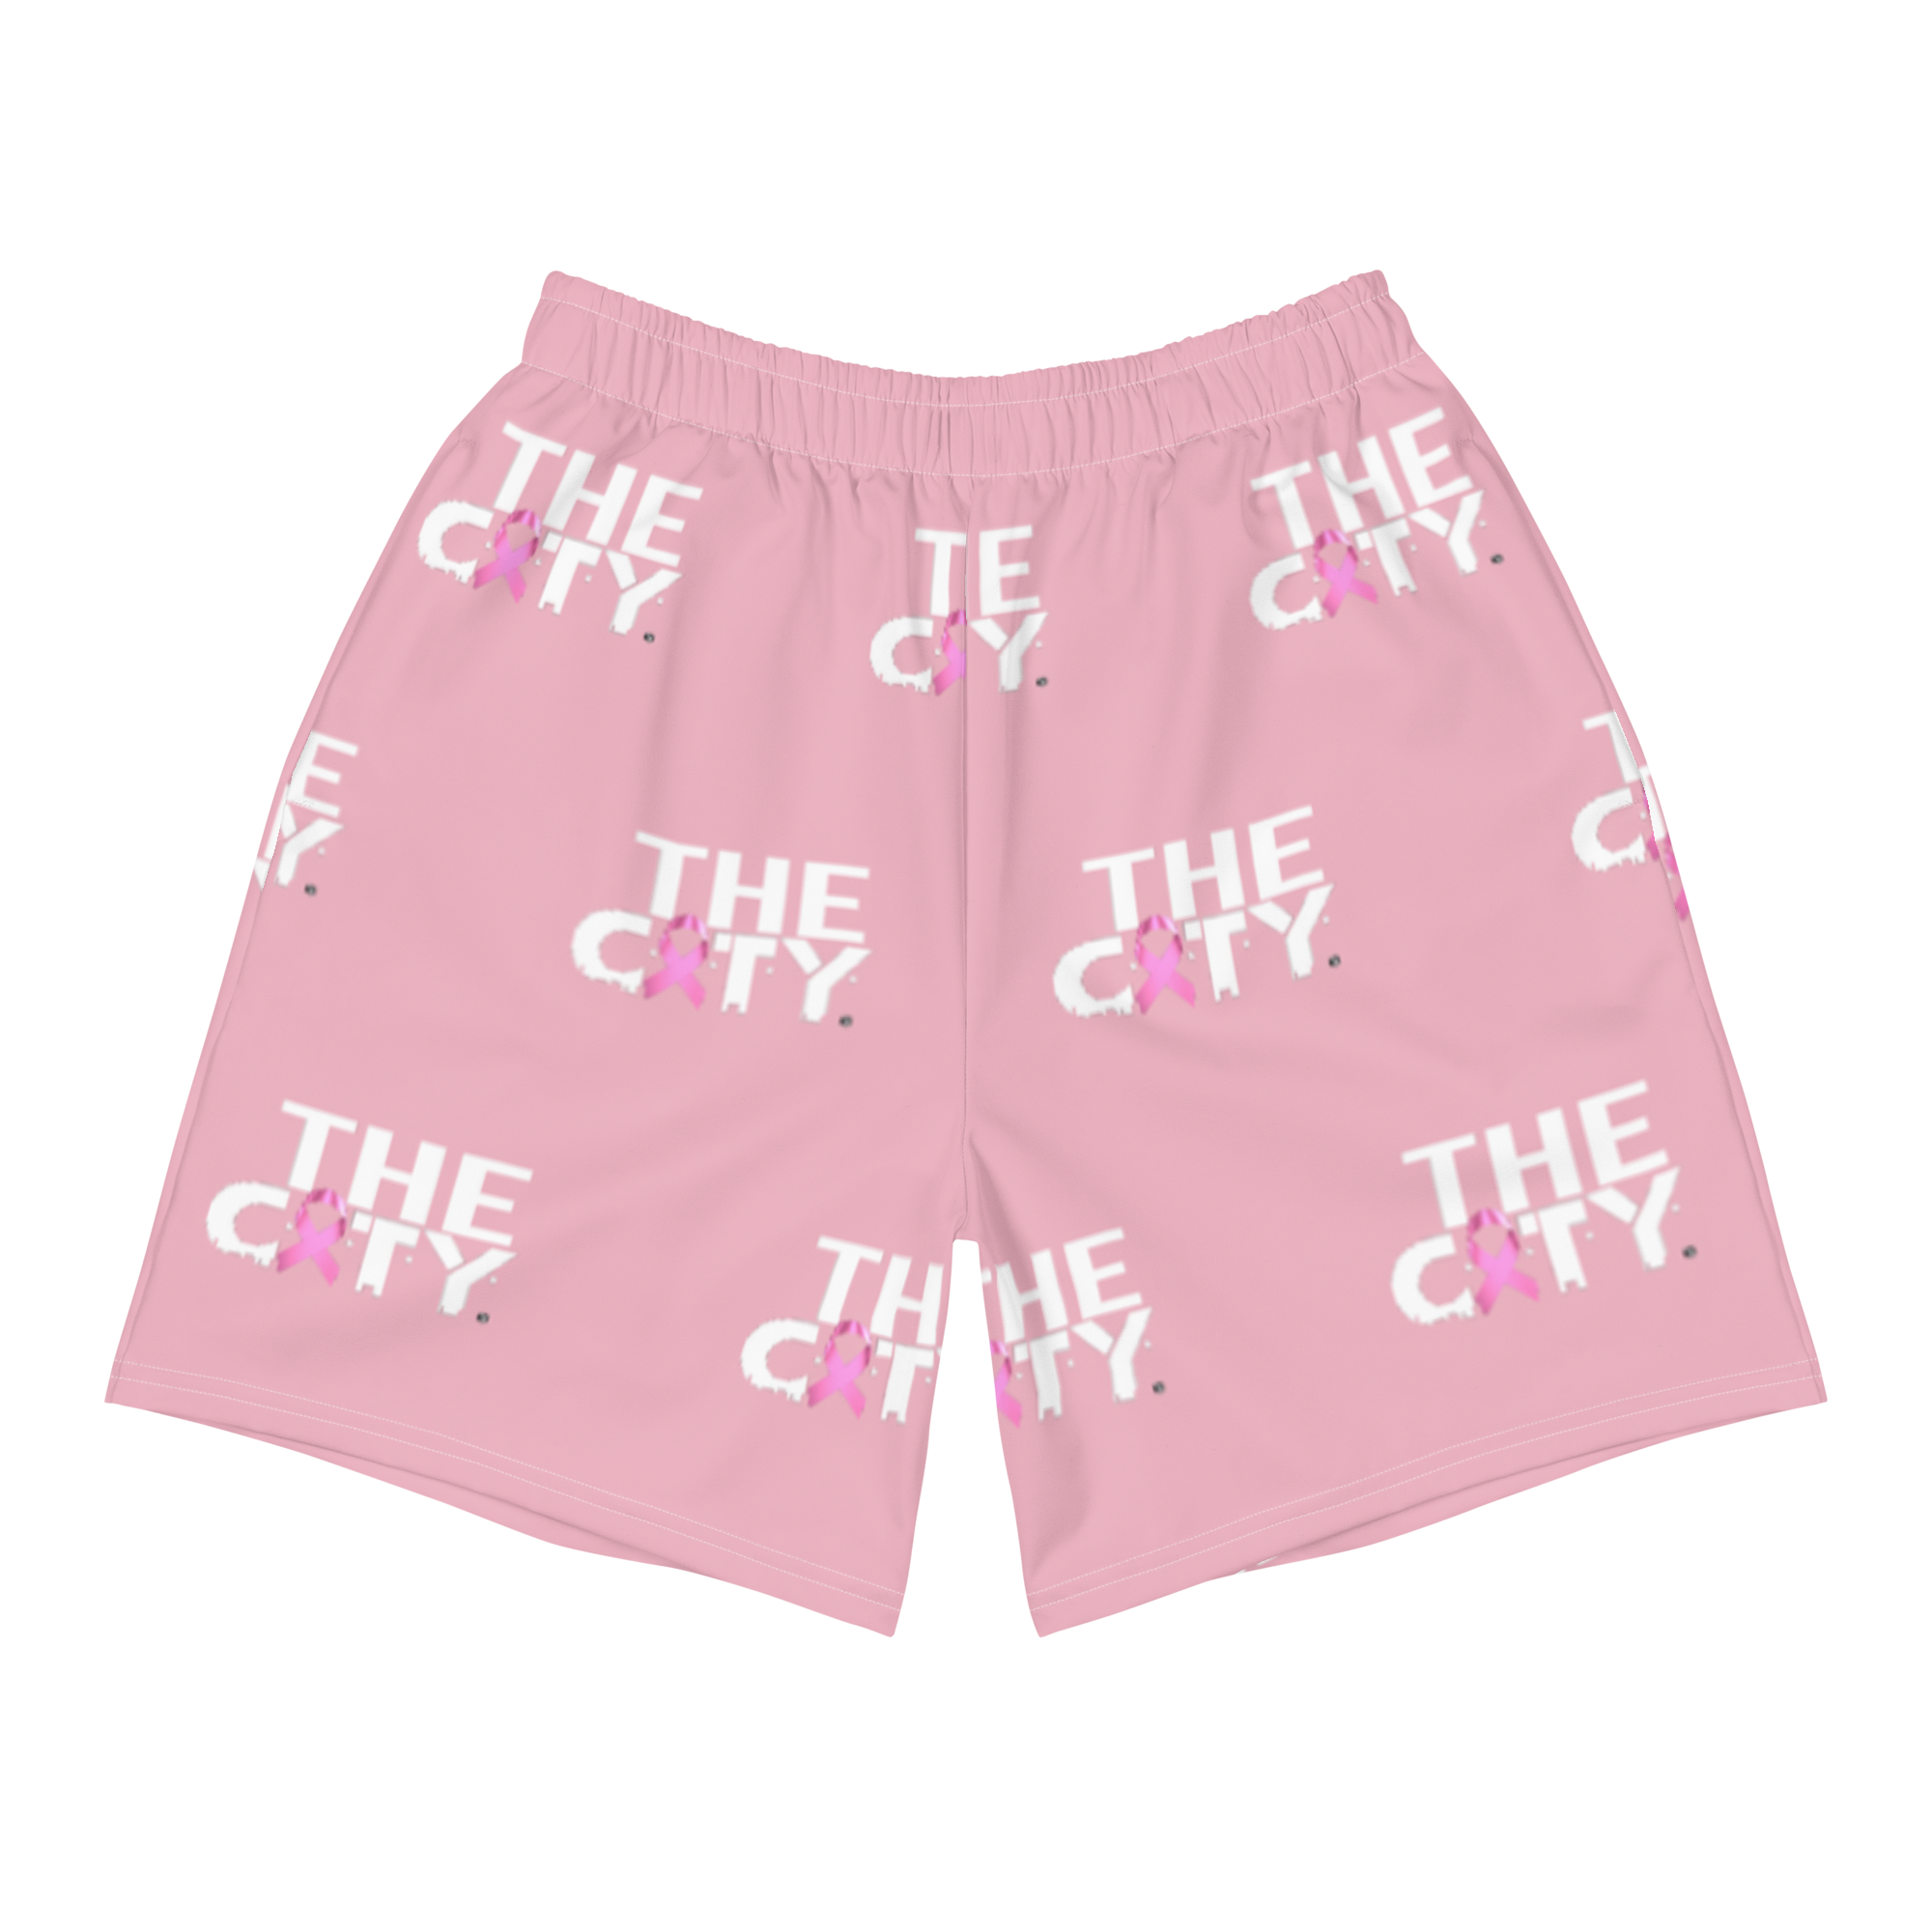 THE C.I.T.Y. Breast Cancer Awareness PNK Men's Athletic Long Shorts